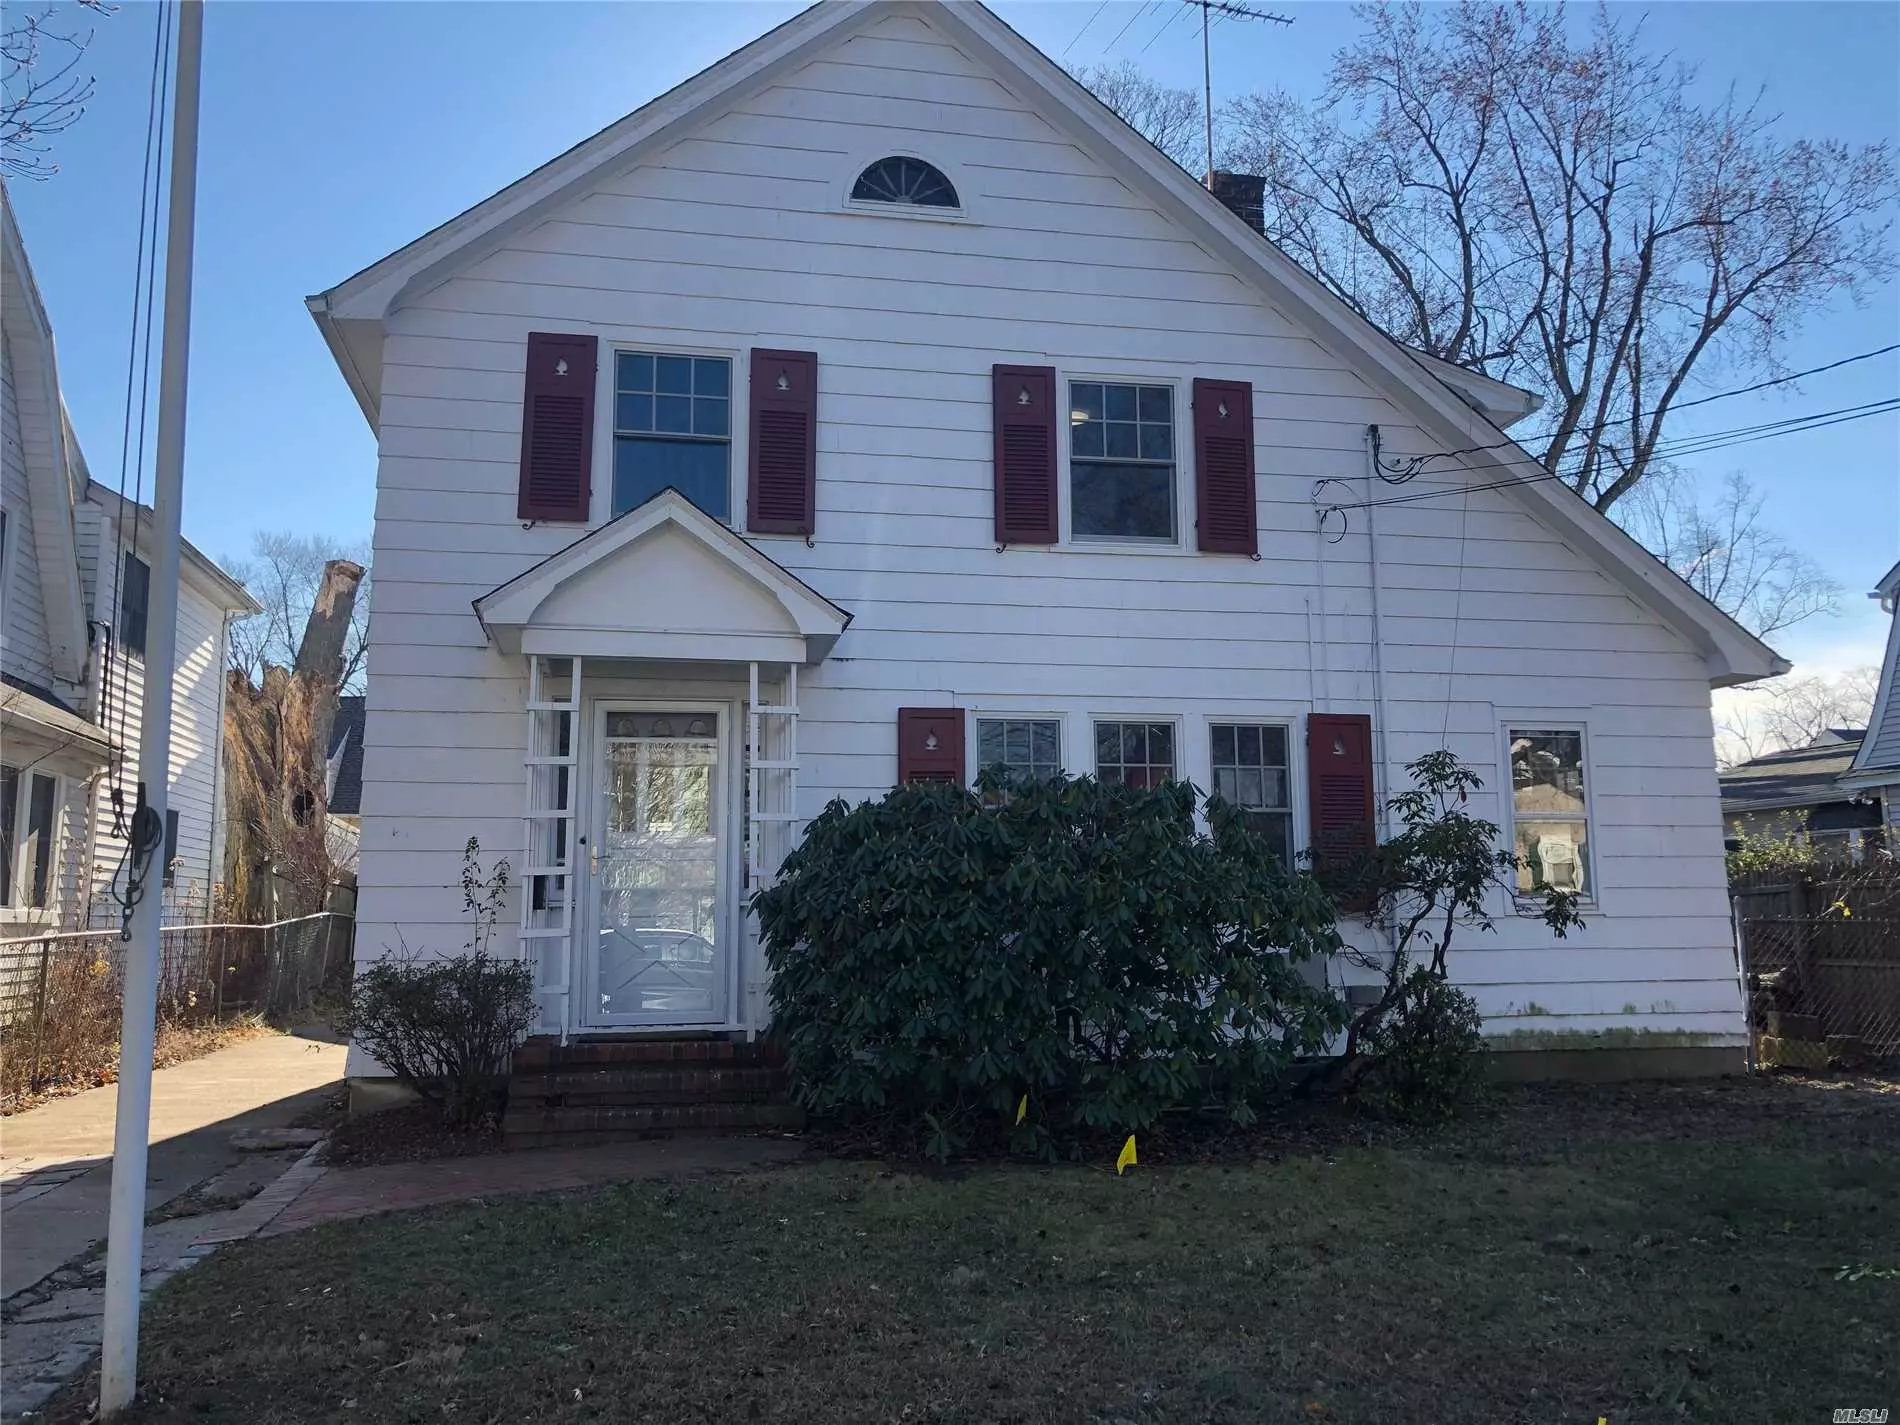 Charming Updated 3 Bedroom Colonial. 1 Full Bath And 2 Half Baths, Eat In Kitchen, Den, Hardwood Floors, New Gas Heating, New Cac, New Windows, 2 Car Garage, , New Washer And Dryer,  Guggenheim Elementary School. Easy Walk To Lirr, Schools, And Shopping.